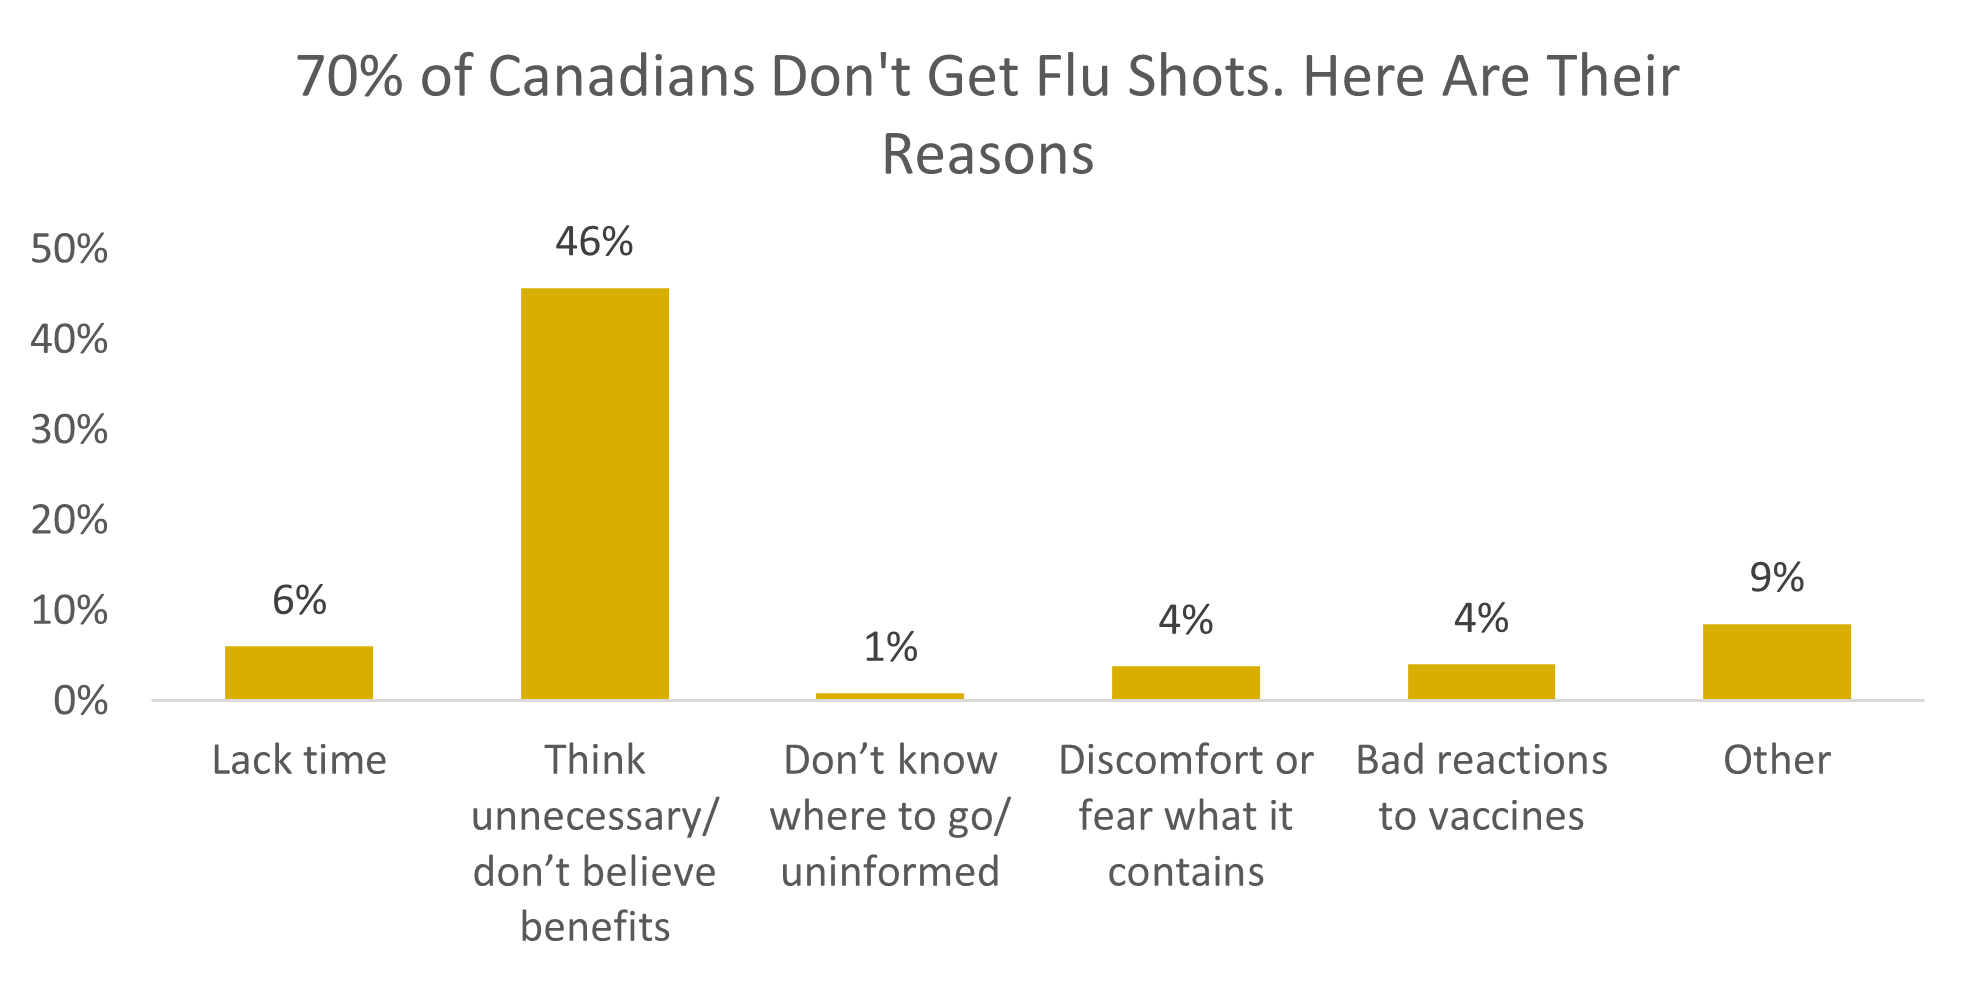 70 percent of Canadians do not get flu shots. Here are their reasons